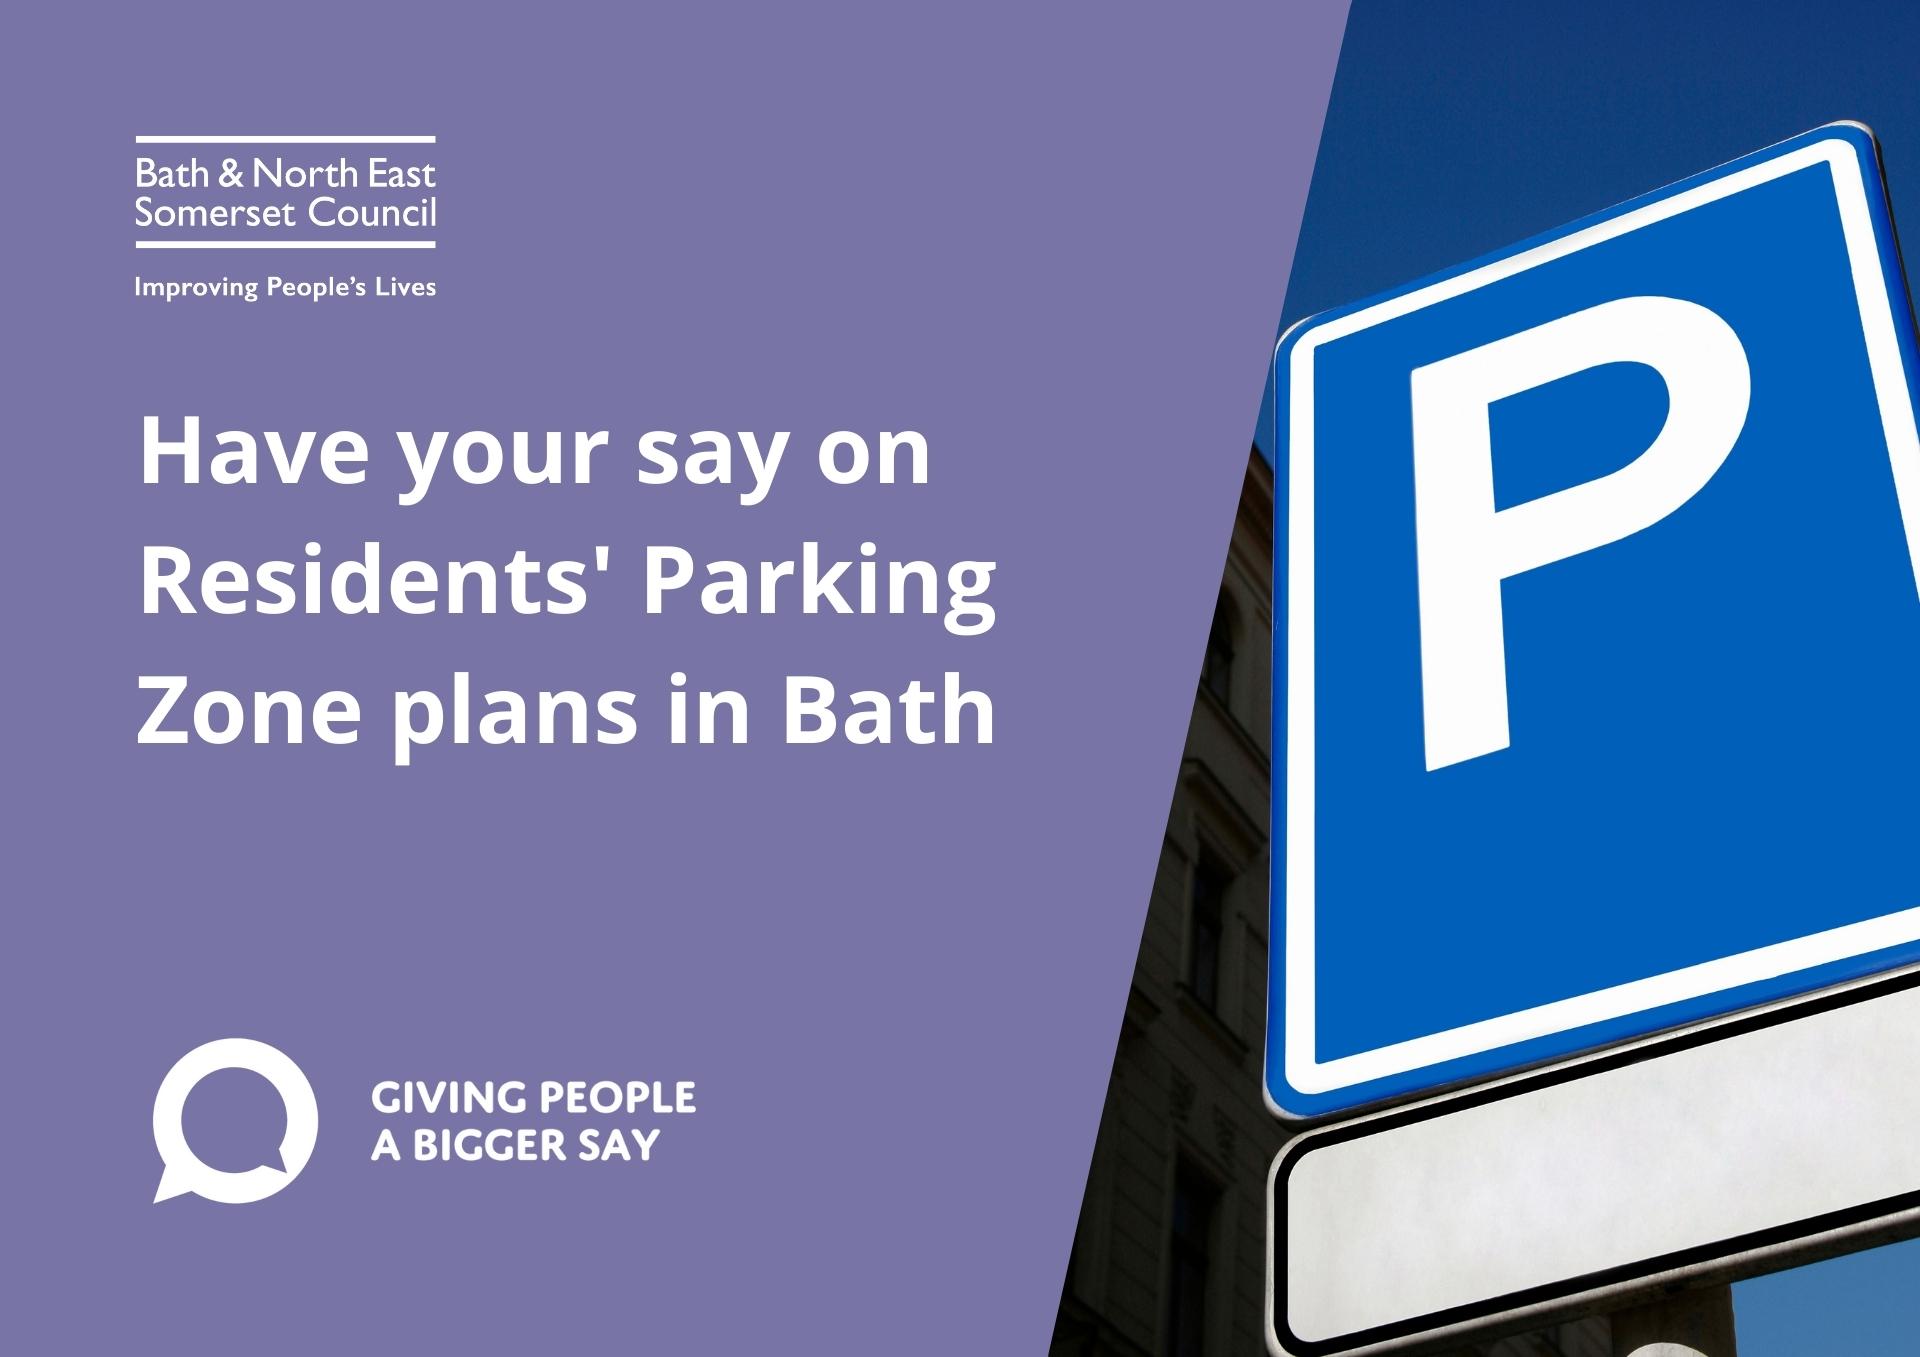 Have your say on Residents' Parking Zones plans in Bath